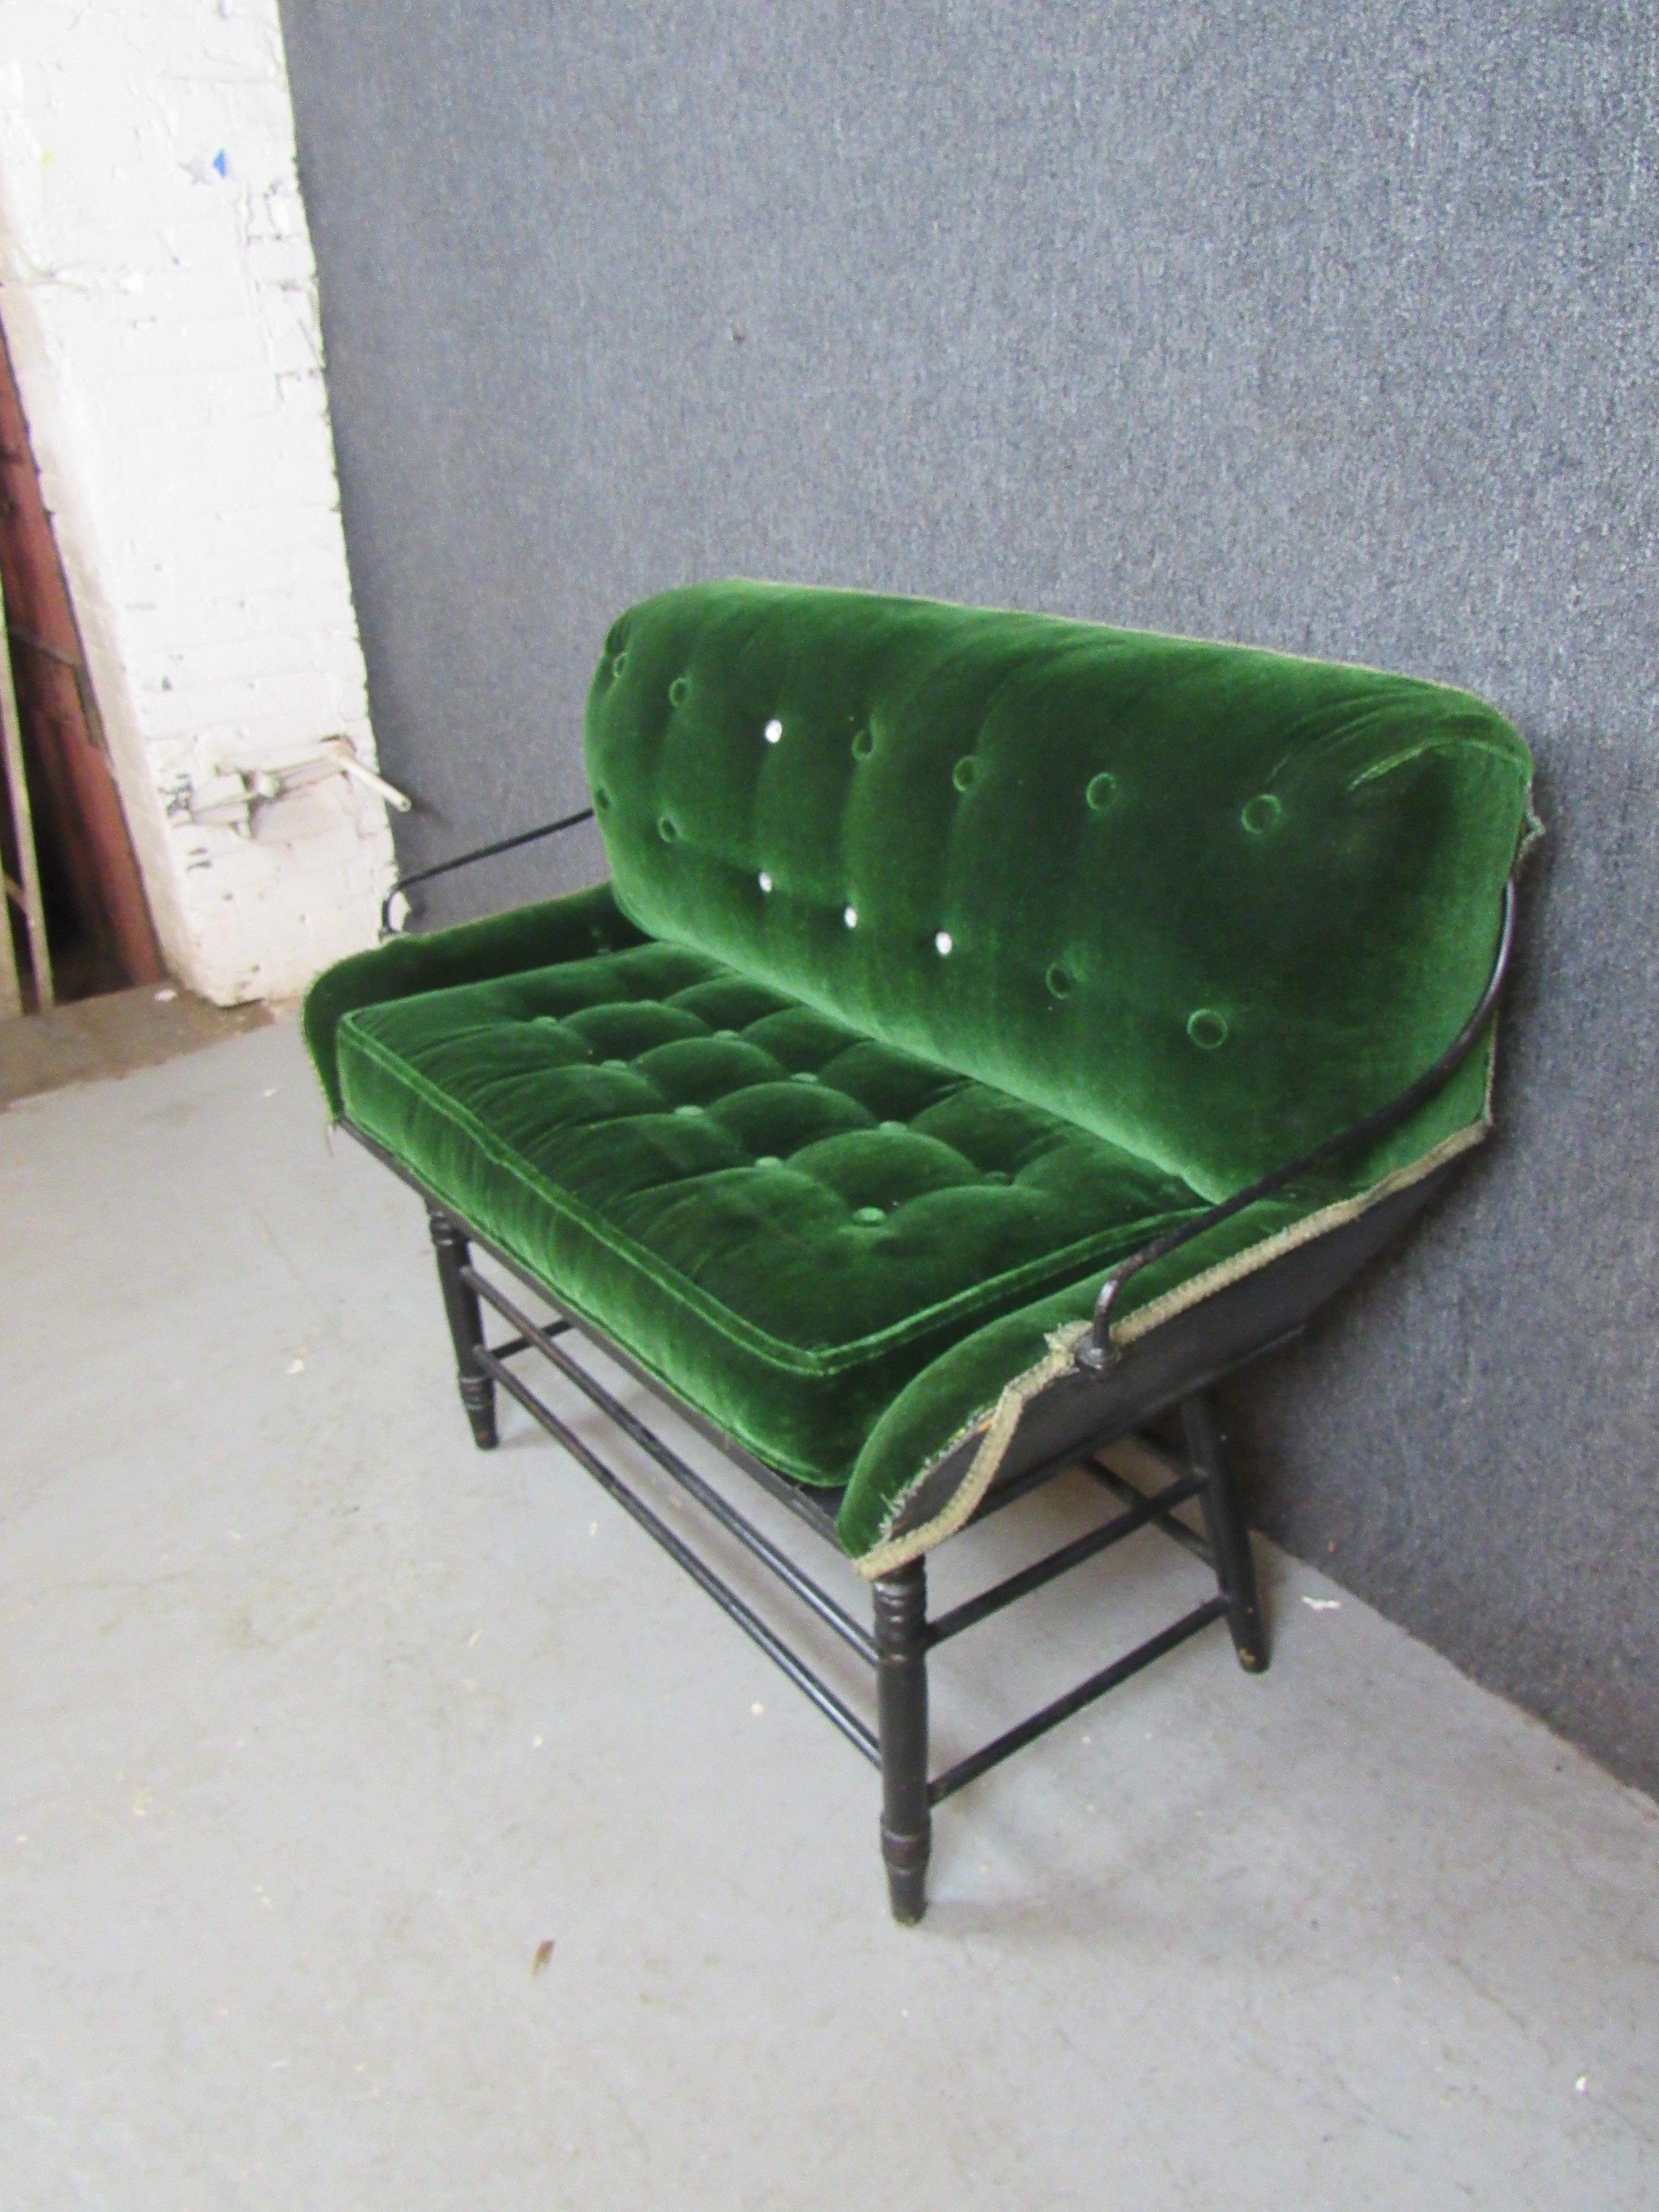 Take a scenic ride from the comfort of home with this endlessly charming antique velvet buggy bench. The genuine carriage bench was repurposed into a cozy love seat with a shabby chic ebonized turned base. The vibrant green velvet upholstery is sure